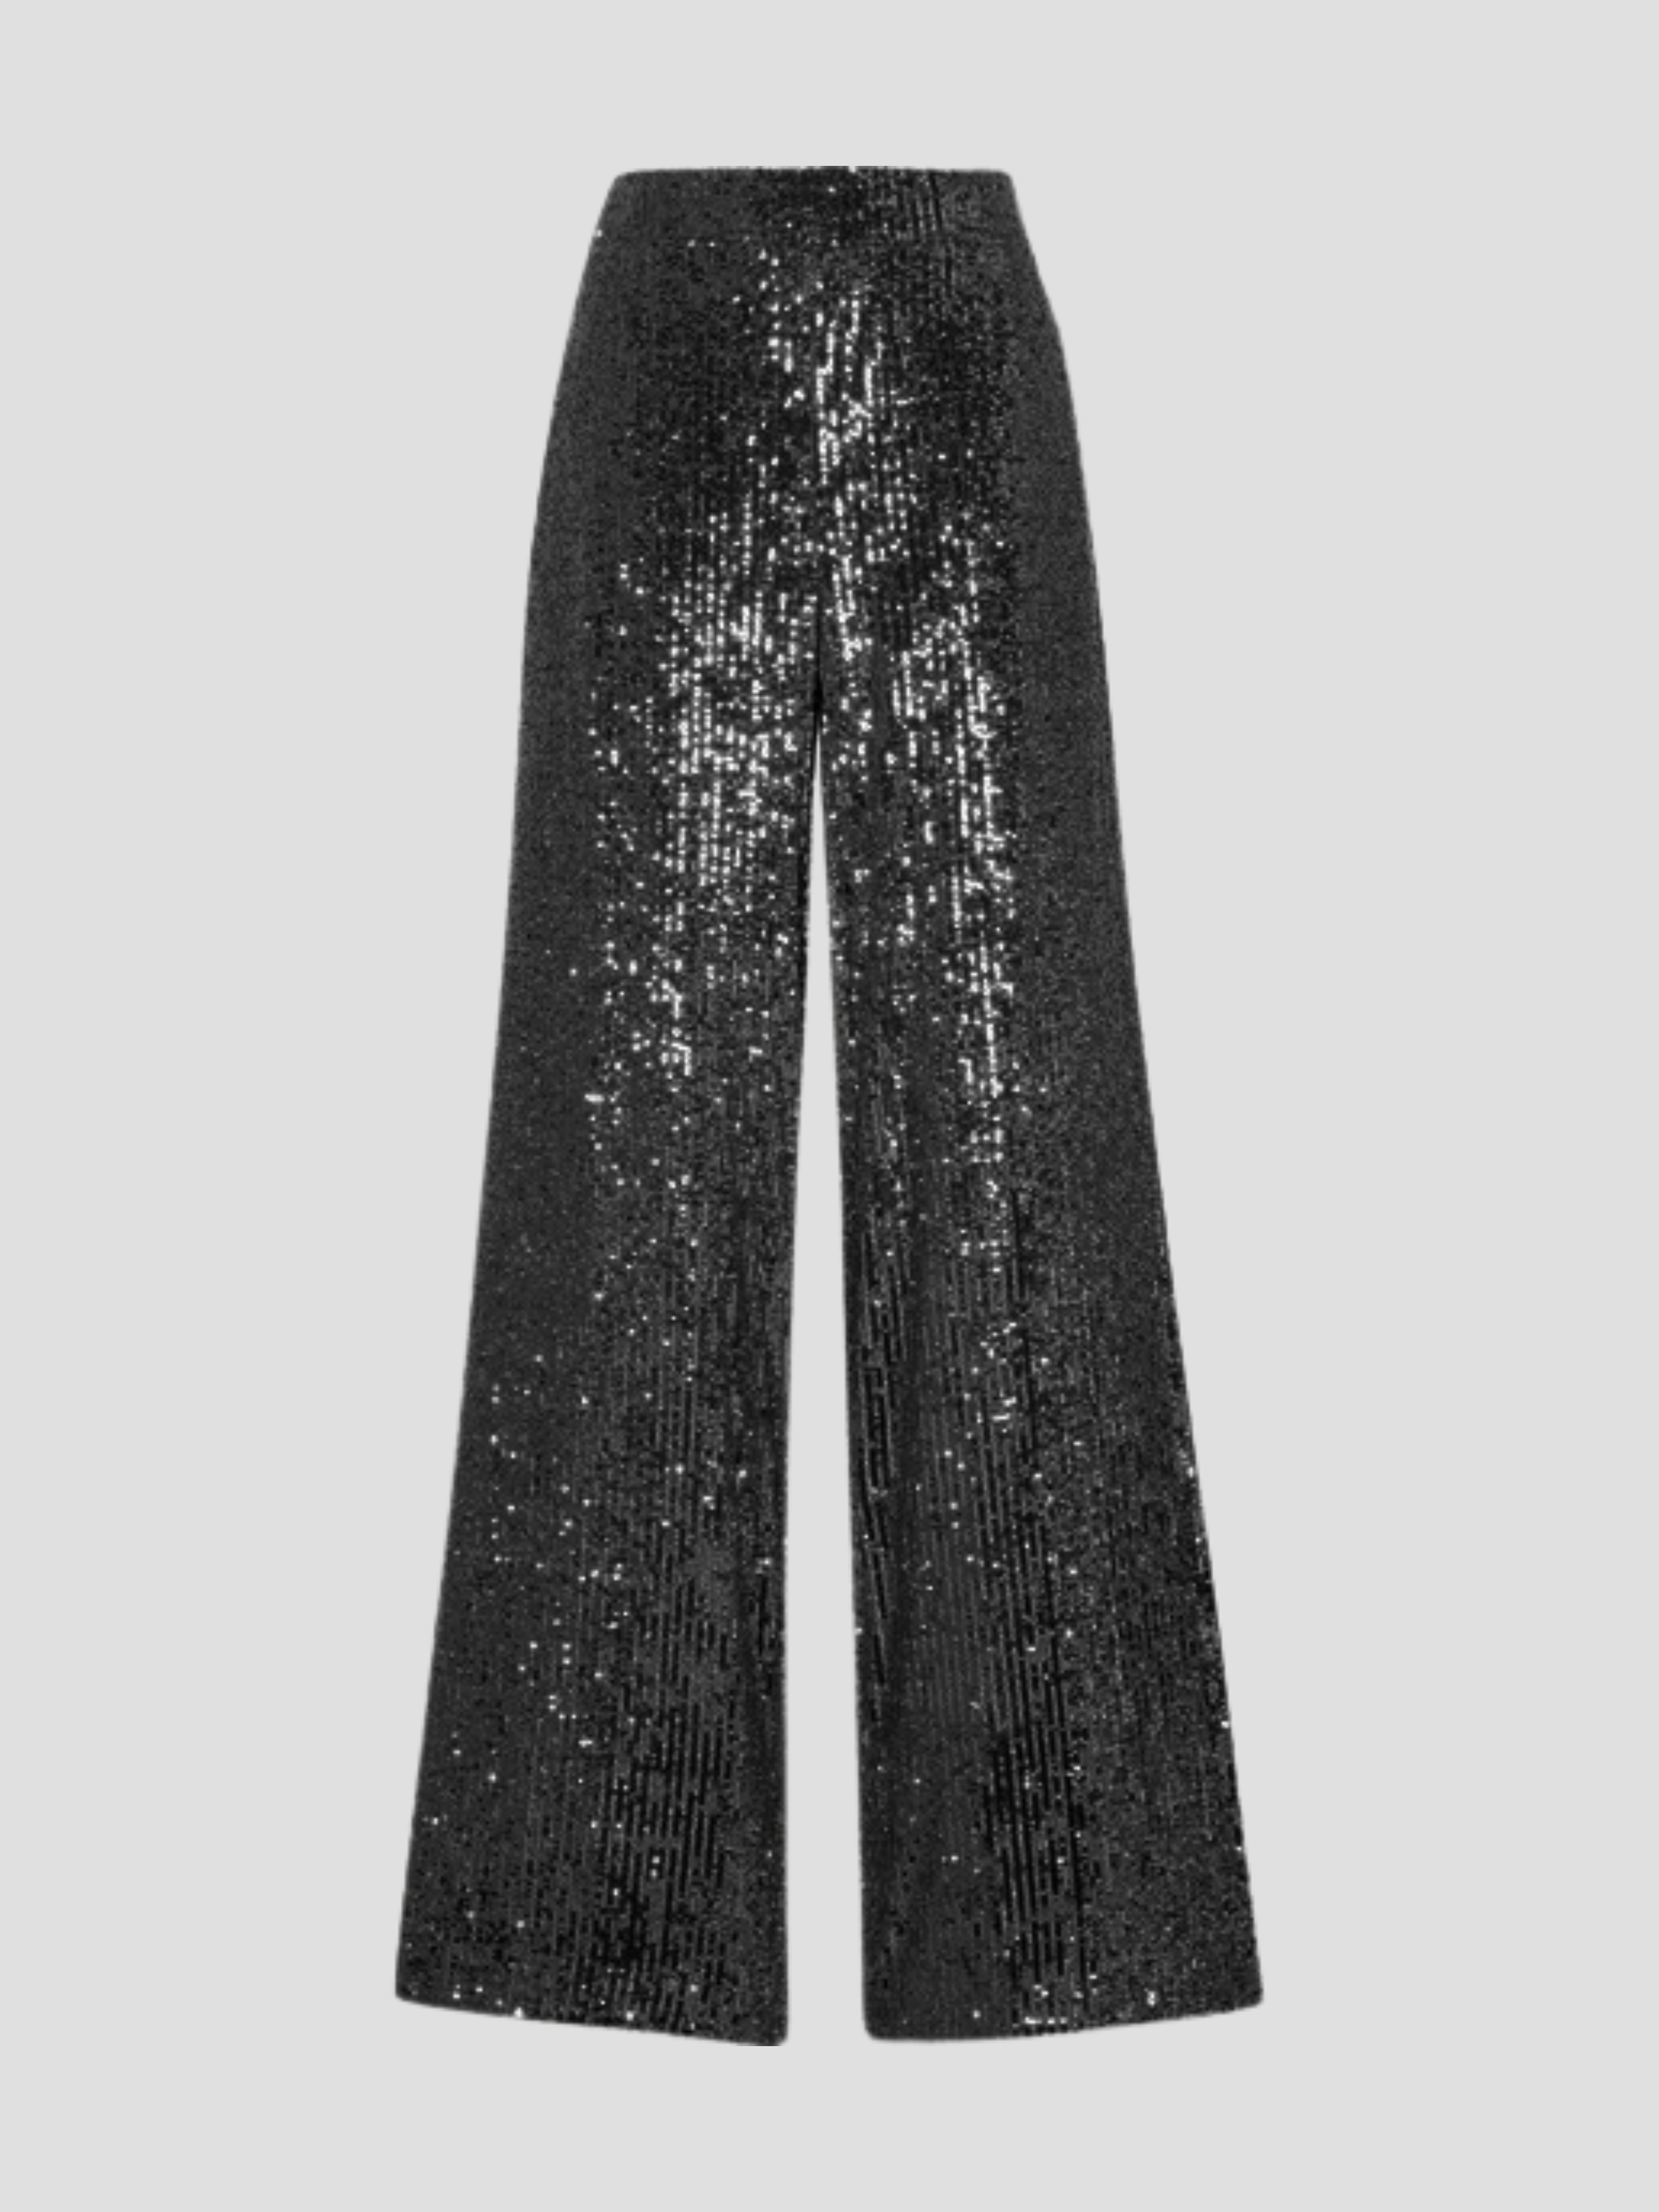 Glitzy Night Out Sequin Flare Pants